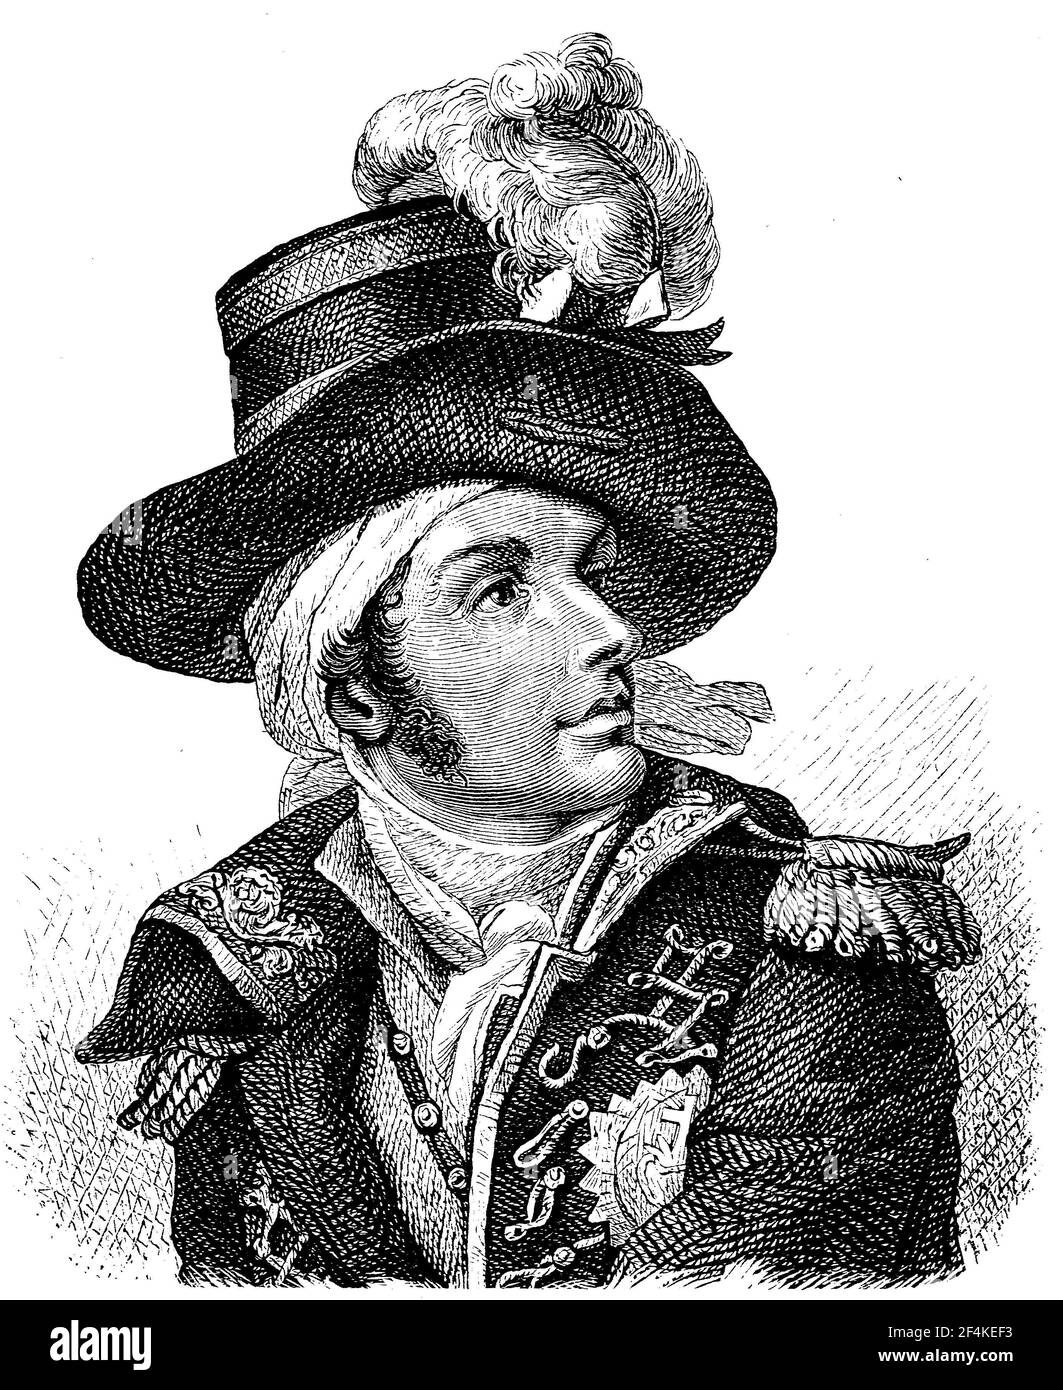 Francois Athanase de Charette de la Contrie, April 21, 1763 - February 29, 1796, was a French naval officer and one of the leaders of the Armee catholique et royale de Vendee during the revolt there in 1793 to 1796  /  Francois Athanase de Charette de la Contrie, 21. April 1763 - 29. Februar 1796, war ein französischer Marineoffizier und einer der Anführer der Armee catholique et royale de Vendee während des dortigen Aufstandes in den Jahren 1793 bis 1796, Historisch, historical, digital improved reproduction of an original from the 19th century / digitale Reproduktion einer Originalvorlage au Stock Photo